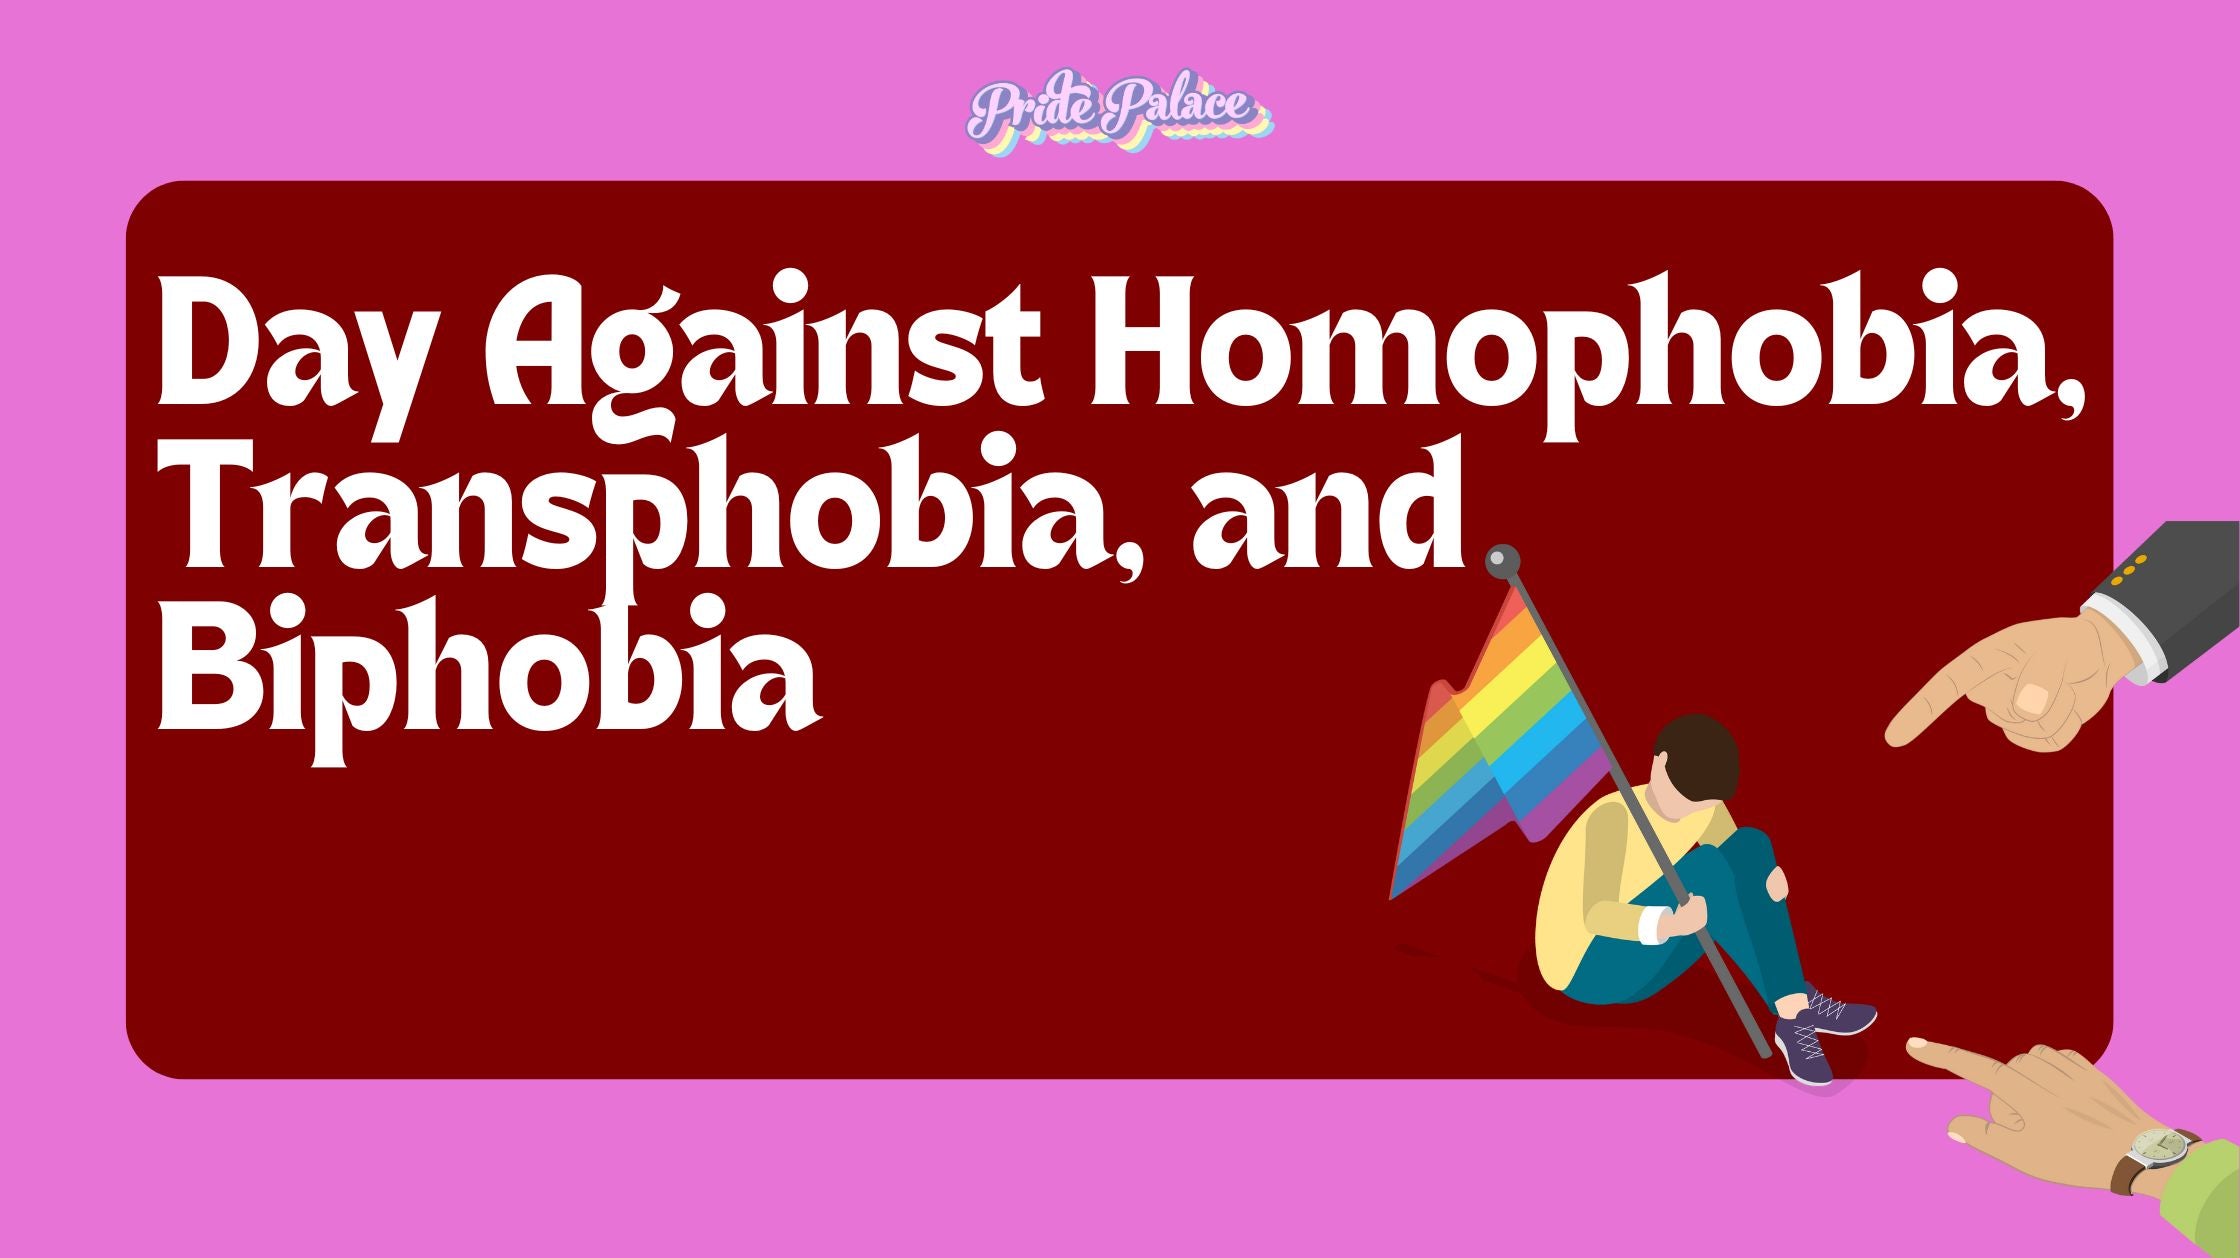 Standing Together Against Homophobia, Transphobia and Biphobia